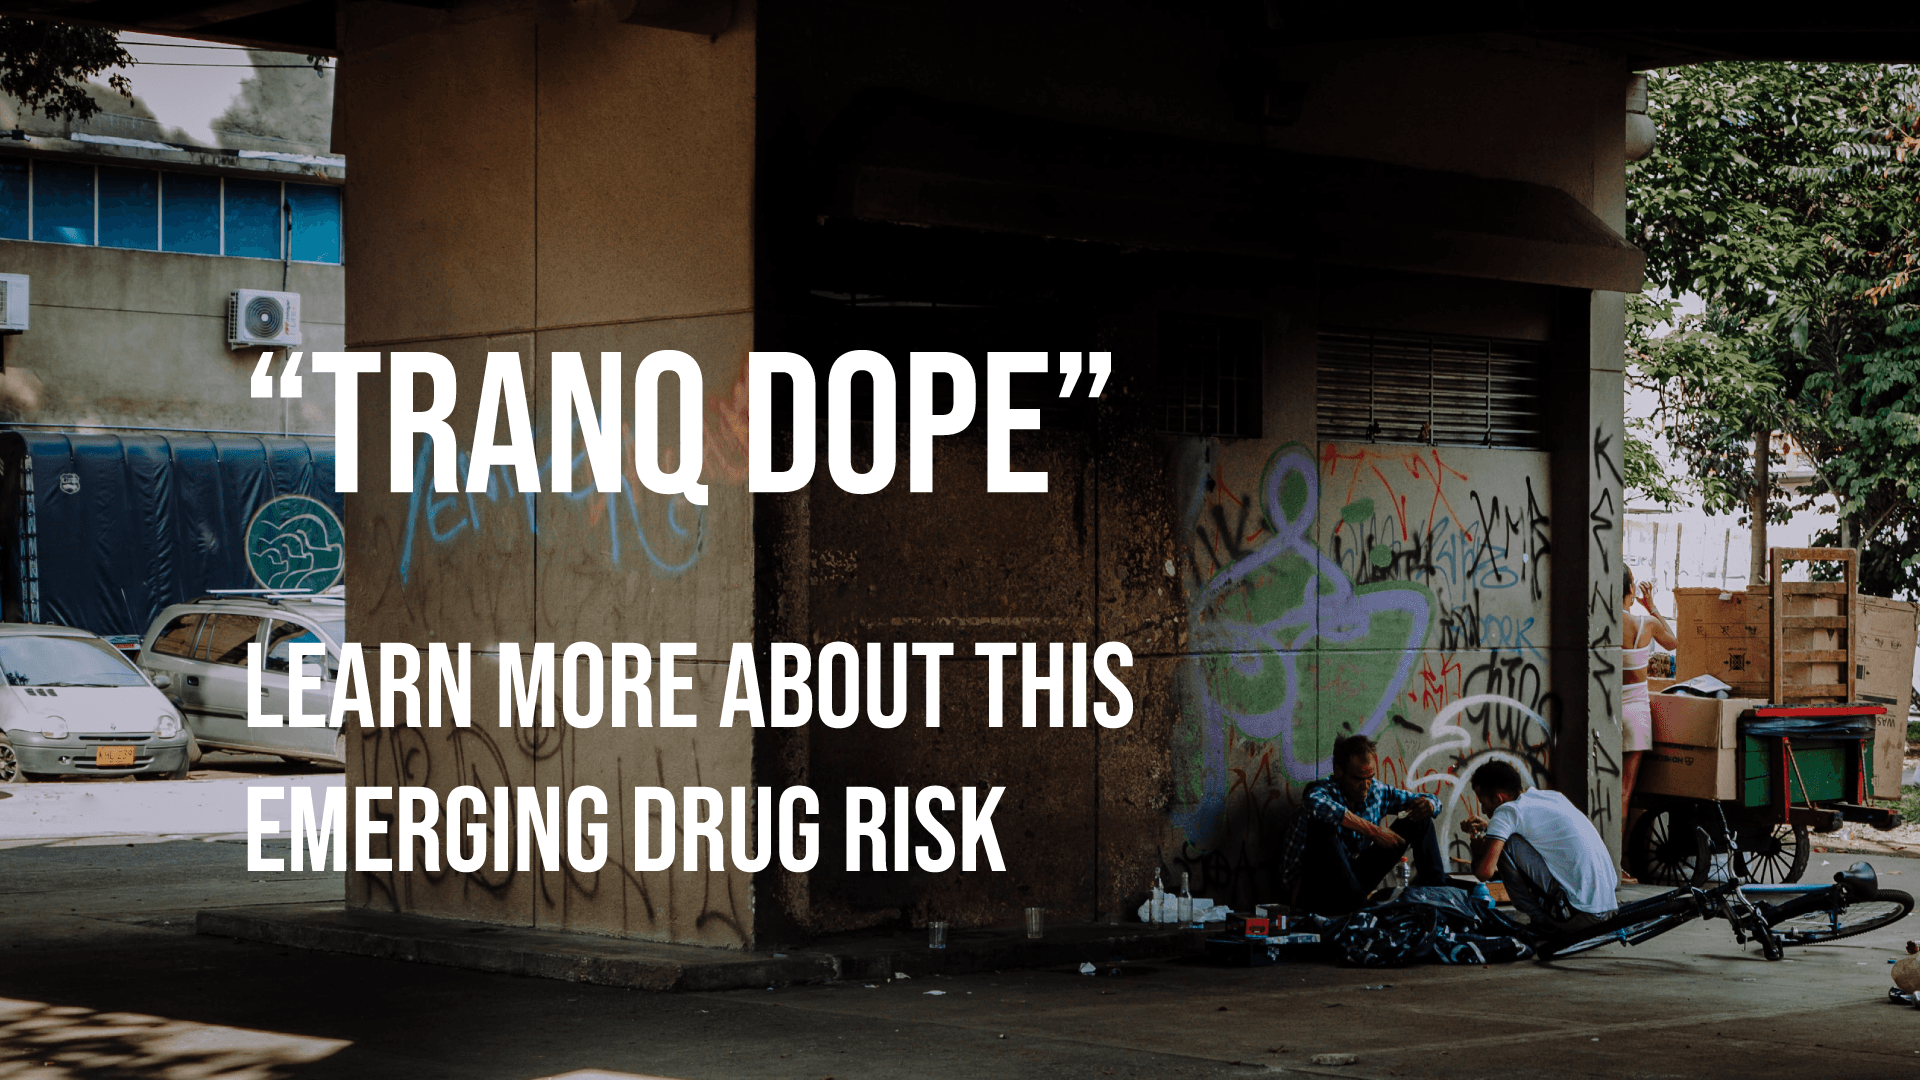 Xylazine: How Does “Tranq Dope” Affect People?